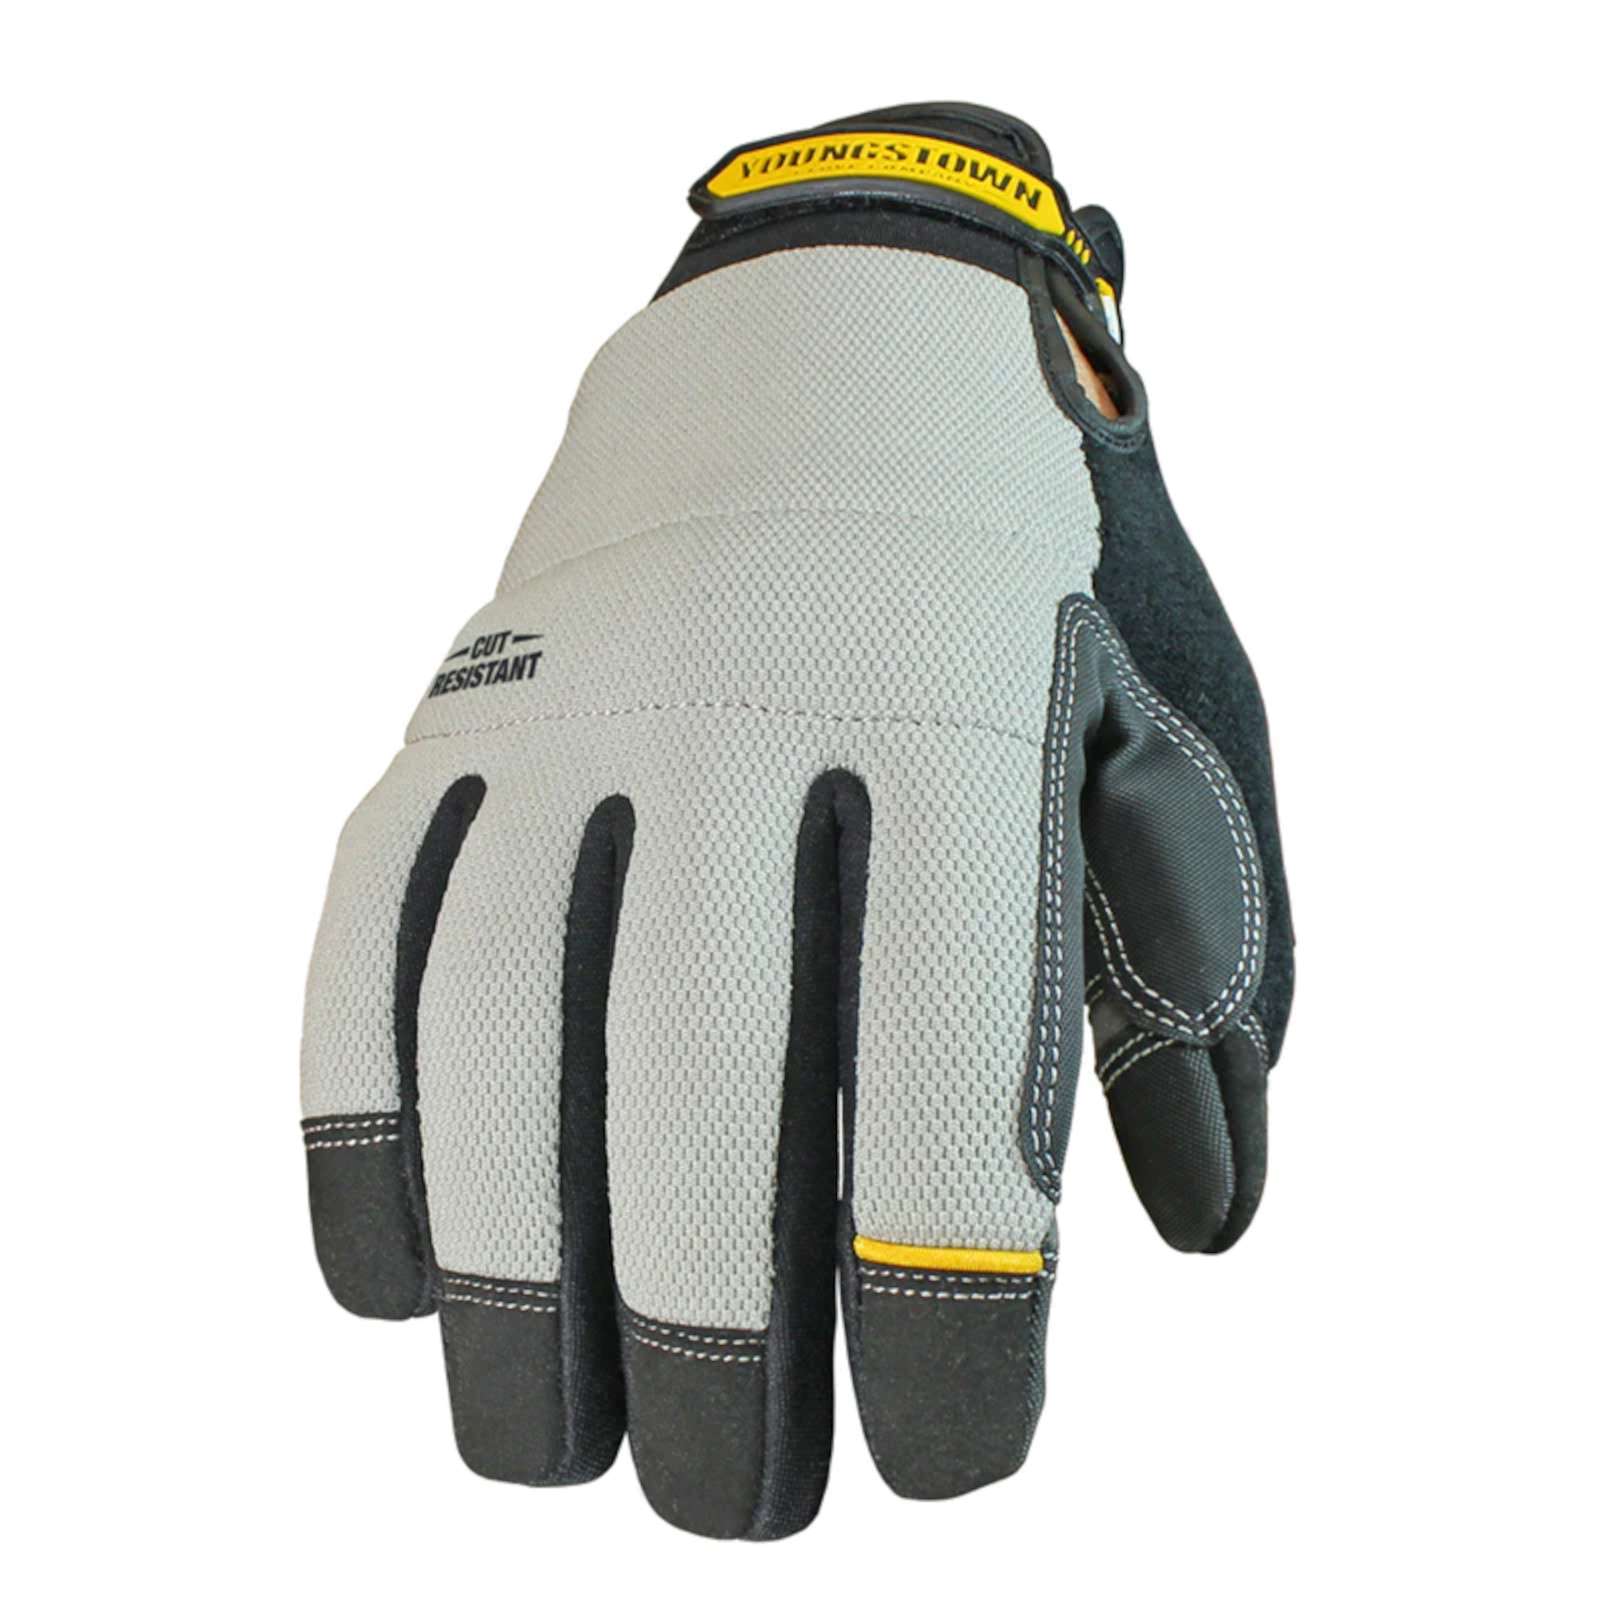 Youngstown Glove General Utility Lined Cut Resistant Glove with Kevlar